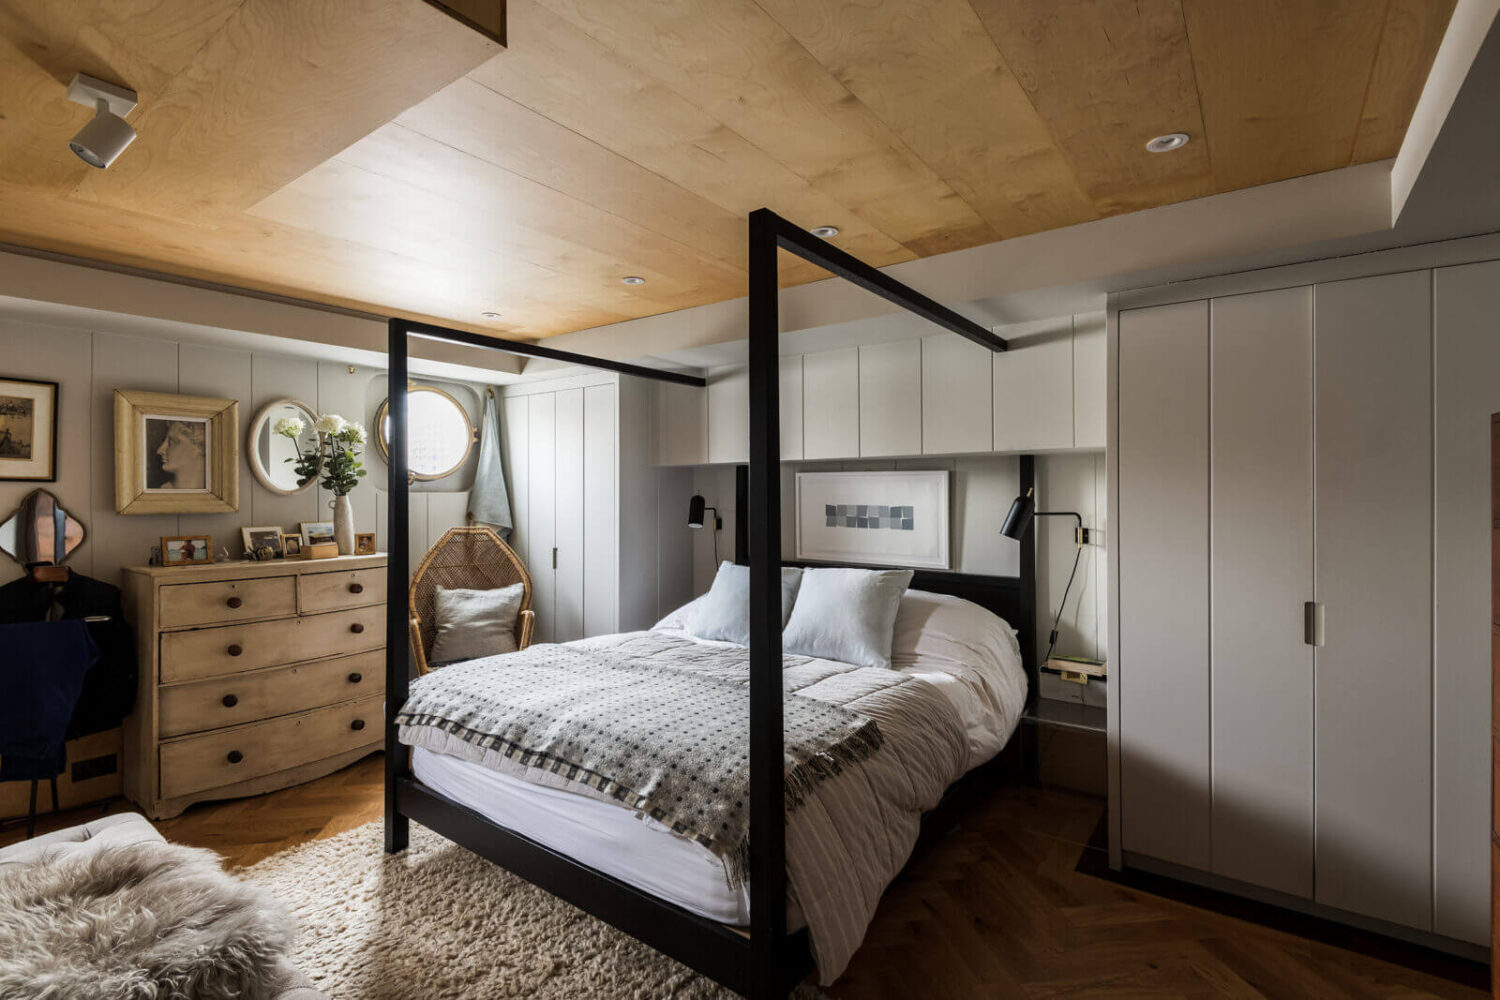 light-gray-bedroom-canopy-bed-round-window-houseboat-london-nordroom